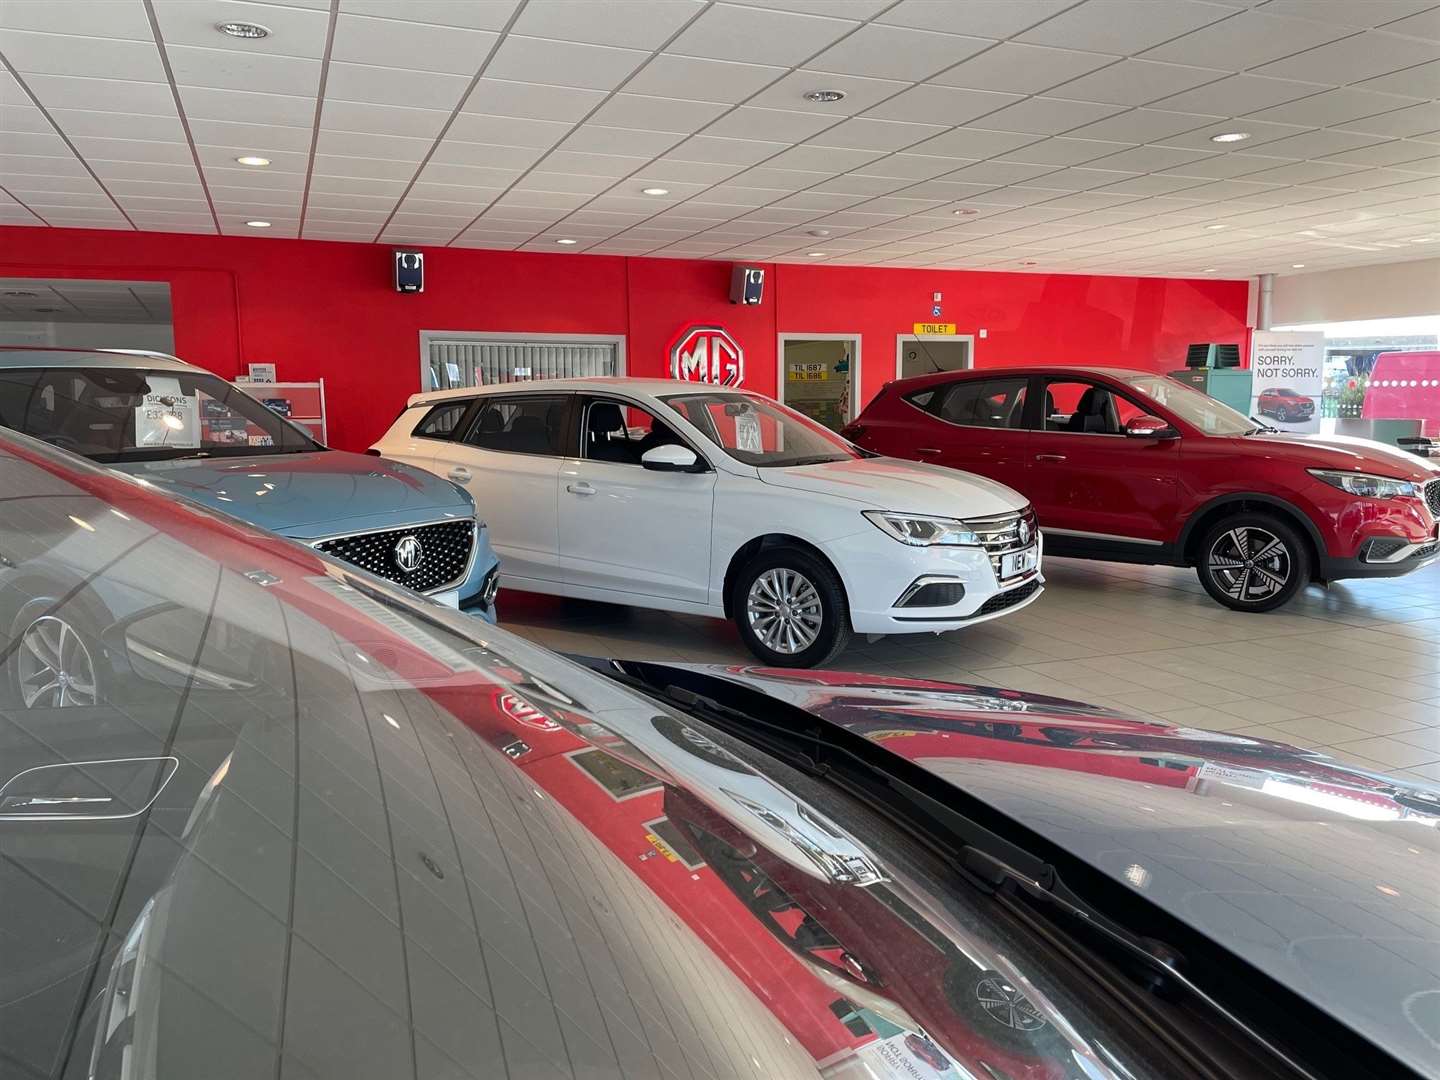 The MG Group offers a range of six models, including <a class=